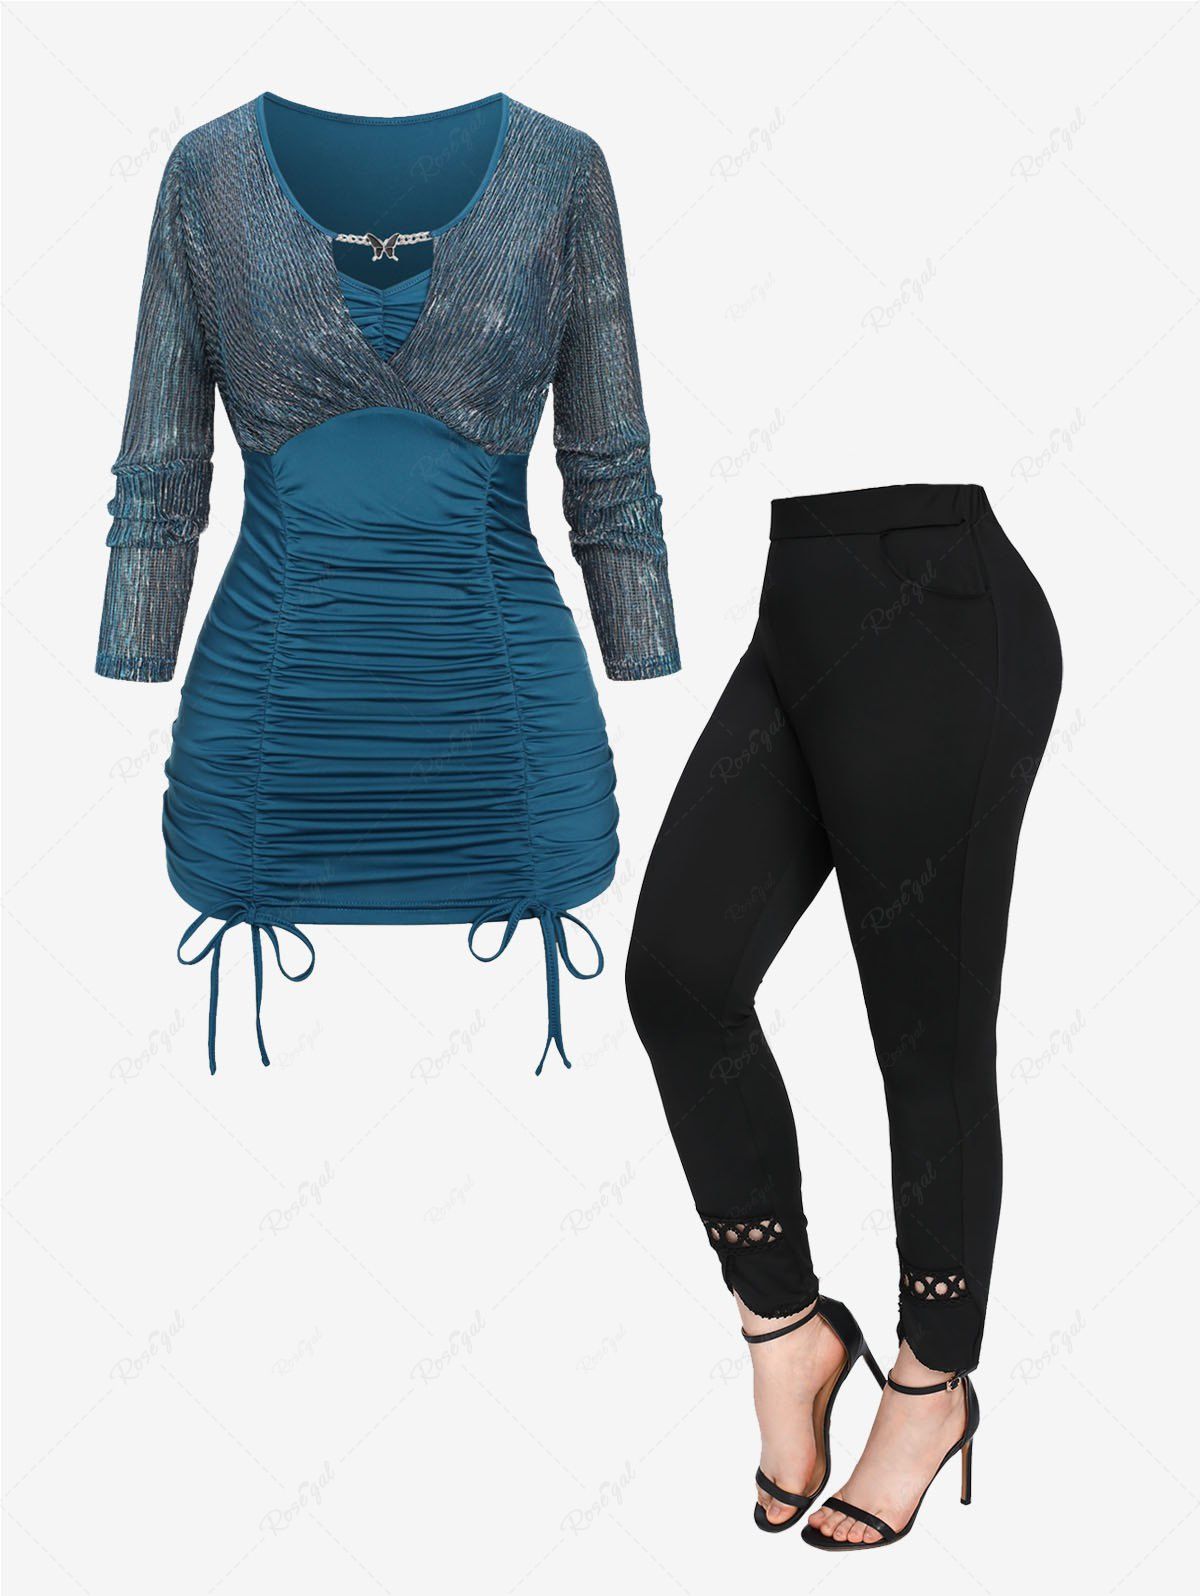 Discount Tie Ruched Butterfly Chain Keyhole Glitter Patchwork Blouse and Hollow Out Lace Trim Pockets Leggings Plus Size Outfit  